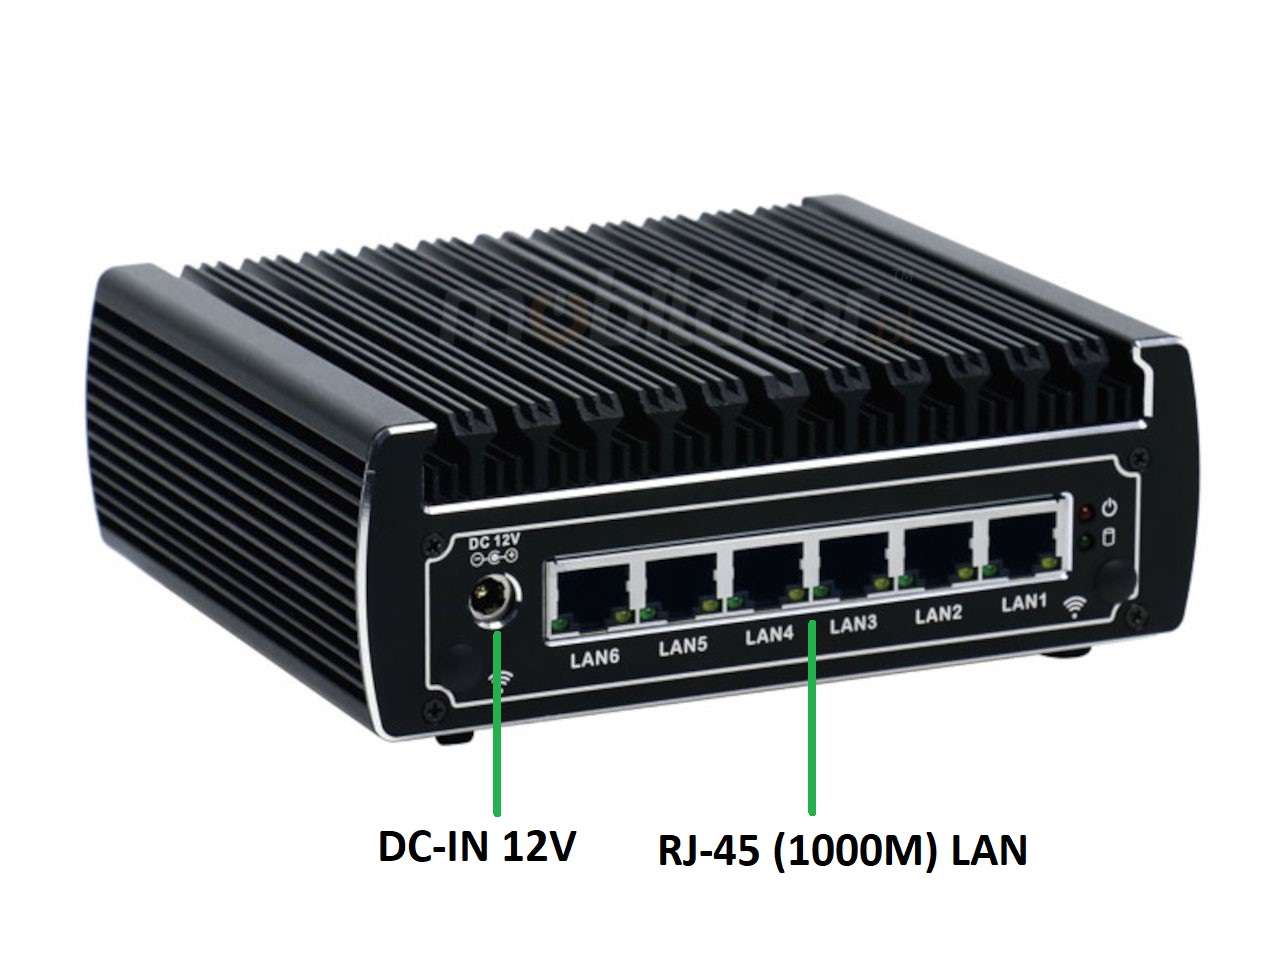  IBOX N133 v.11, back IO, industrial small fast reliable fanless industrial small LAN INTEL i3 SSD DDR4 